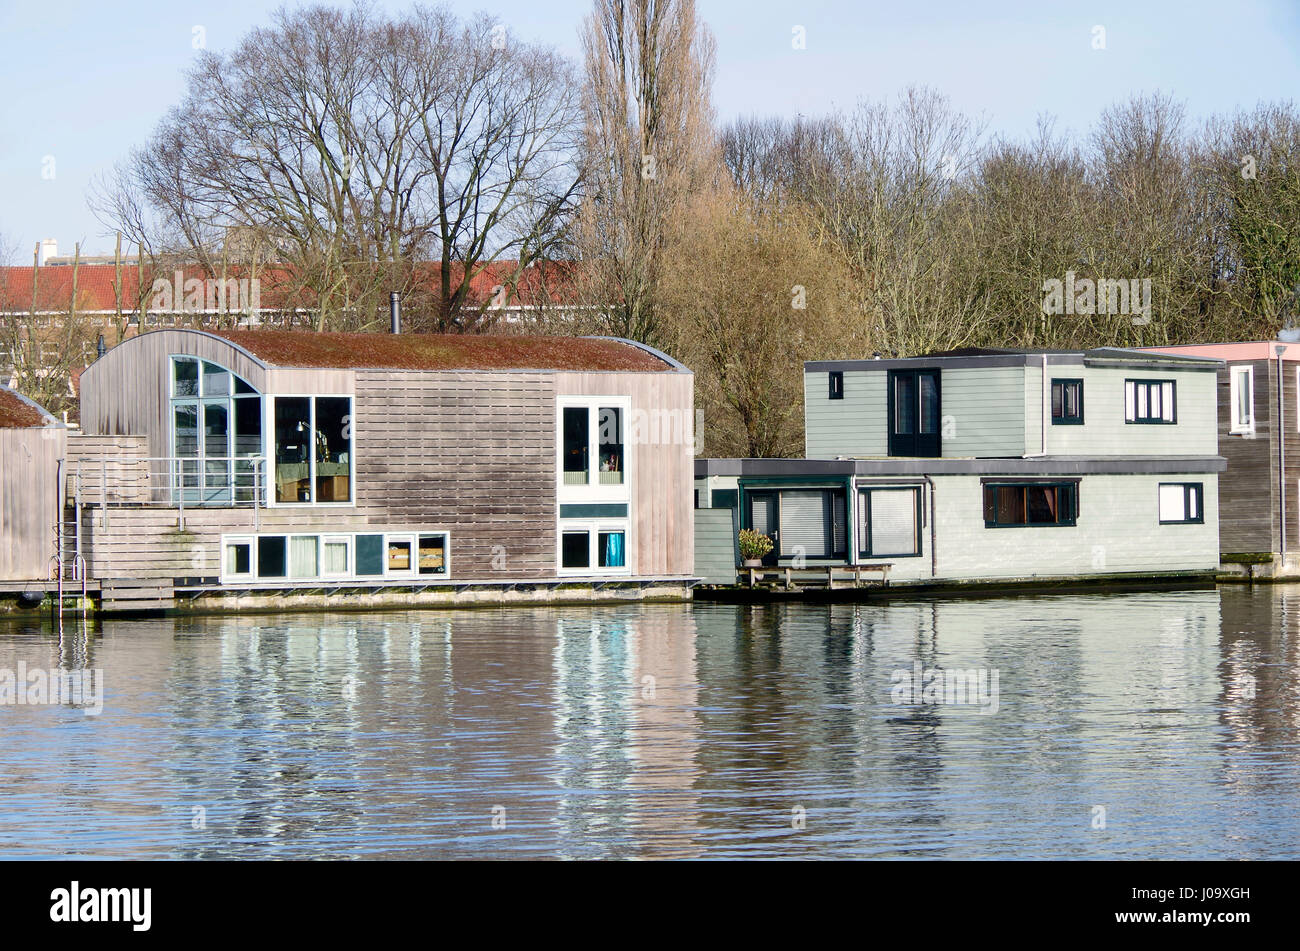 Architecturally distinguished modern house boats on Schinkel canal, Amsterdam-Zuid, Netherlands Stock Photo